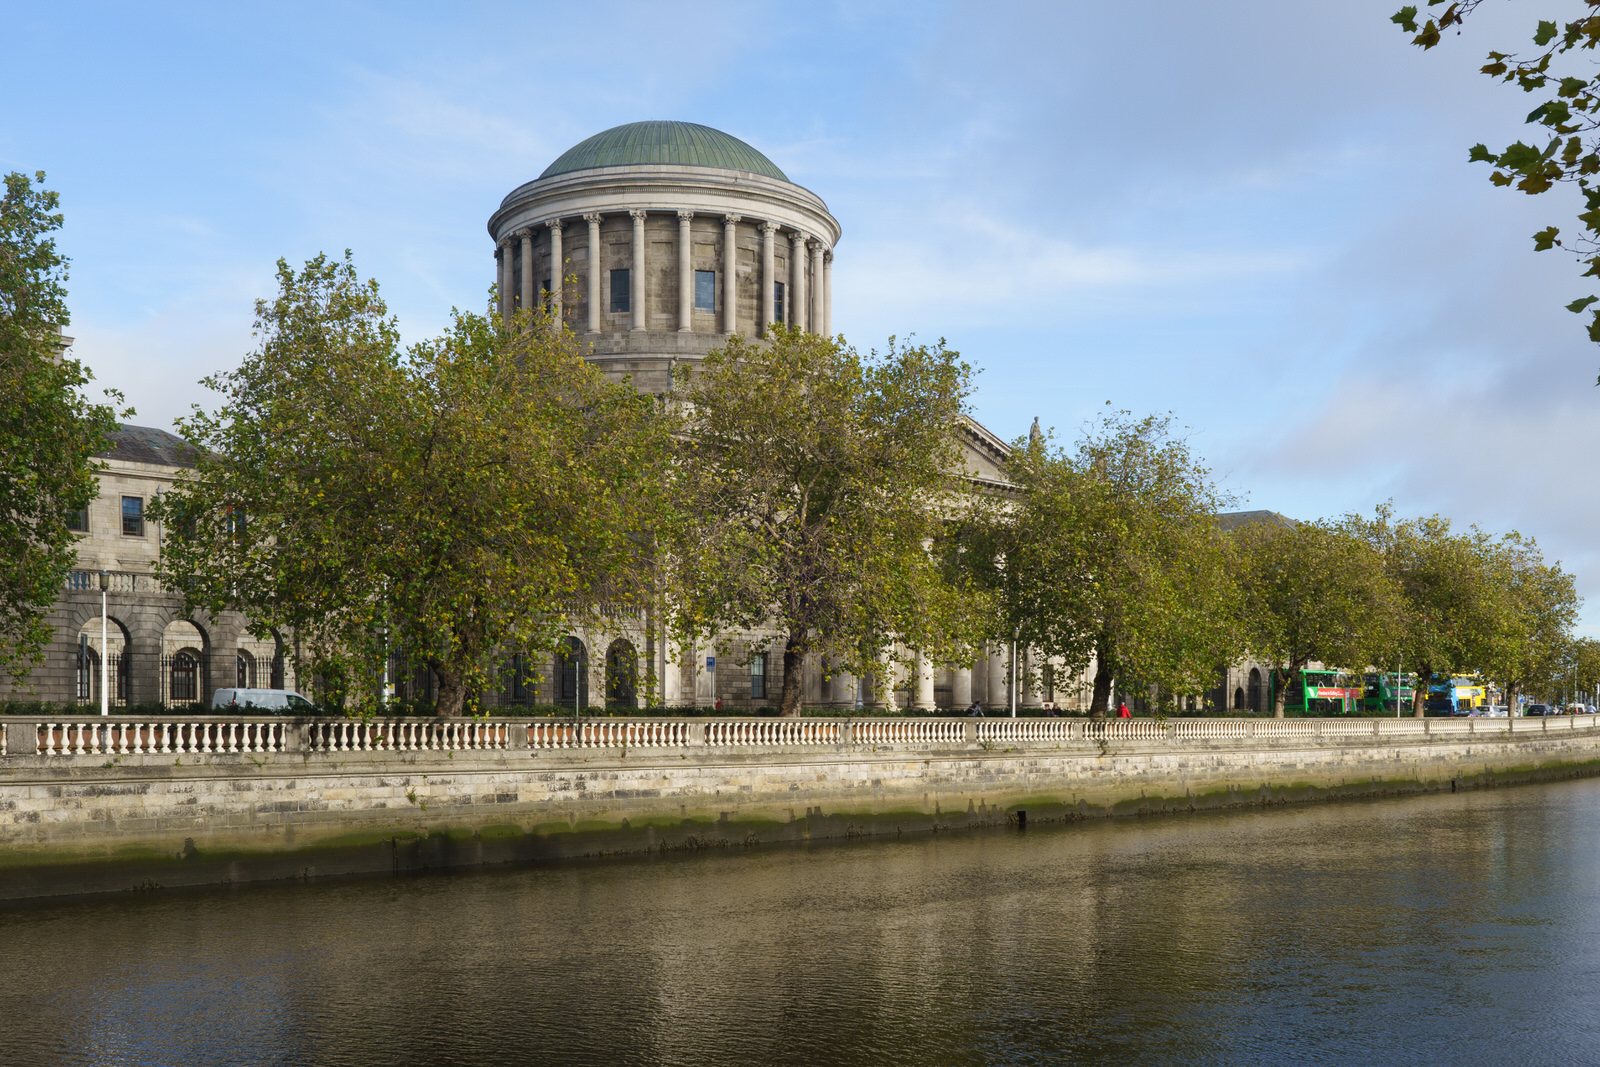 THE FOUR COURTS AFTER RESTORATION